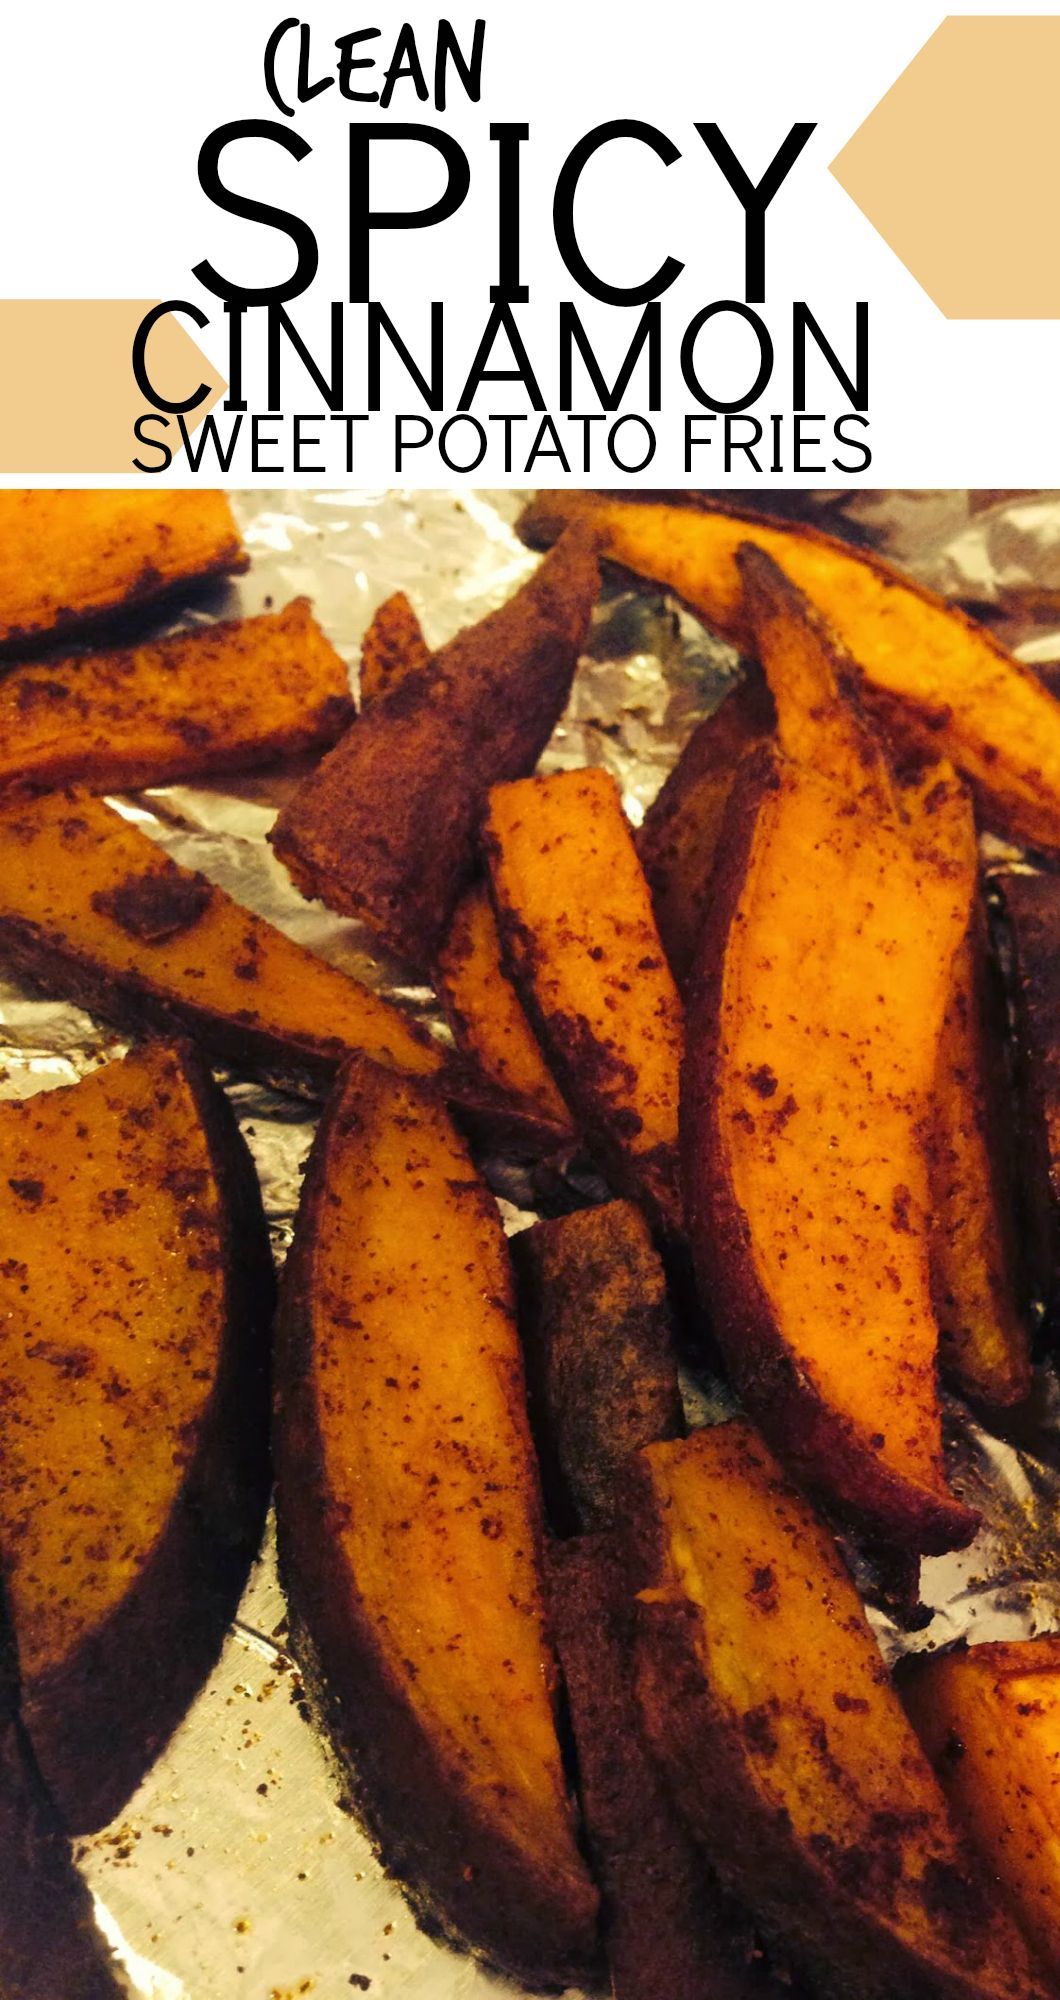 [Clean Spicy Cinnamon Sweet Potato Fries] These sweet potato fries are delicious and have an extra kick to them! They are also a